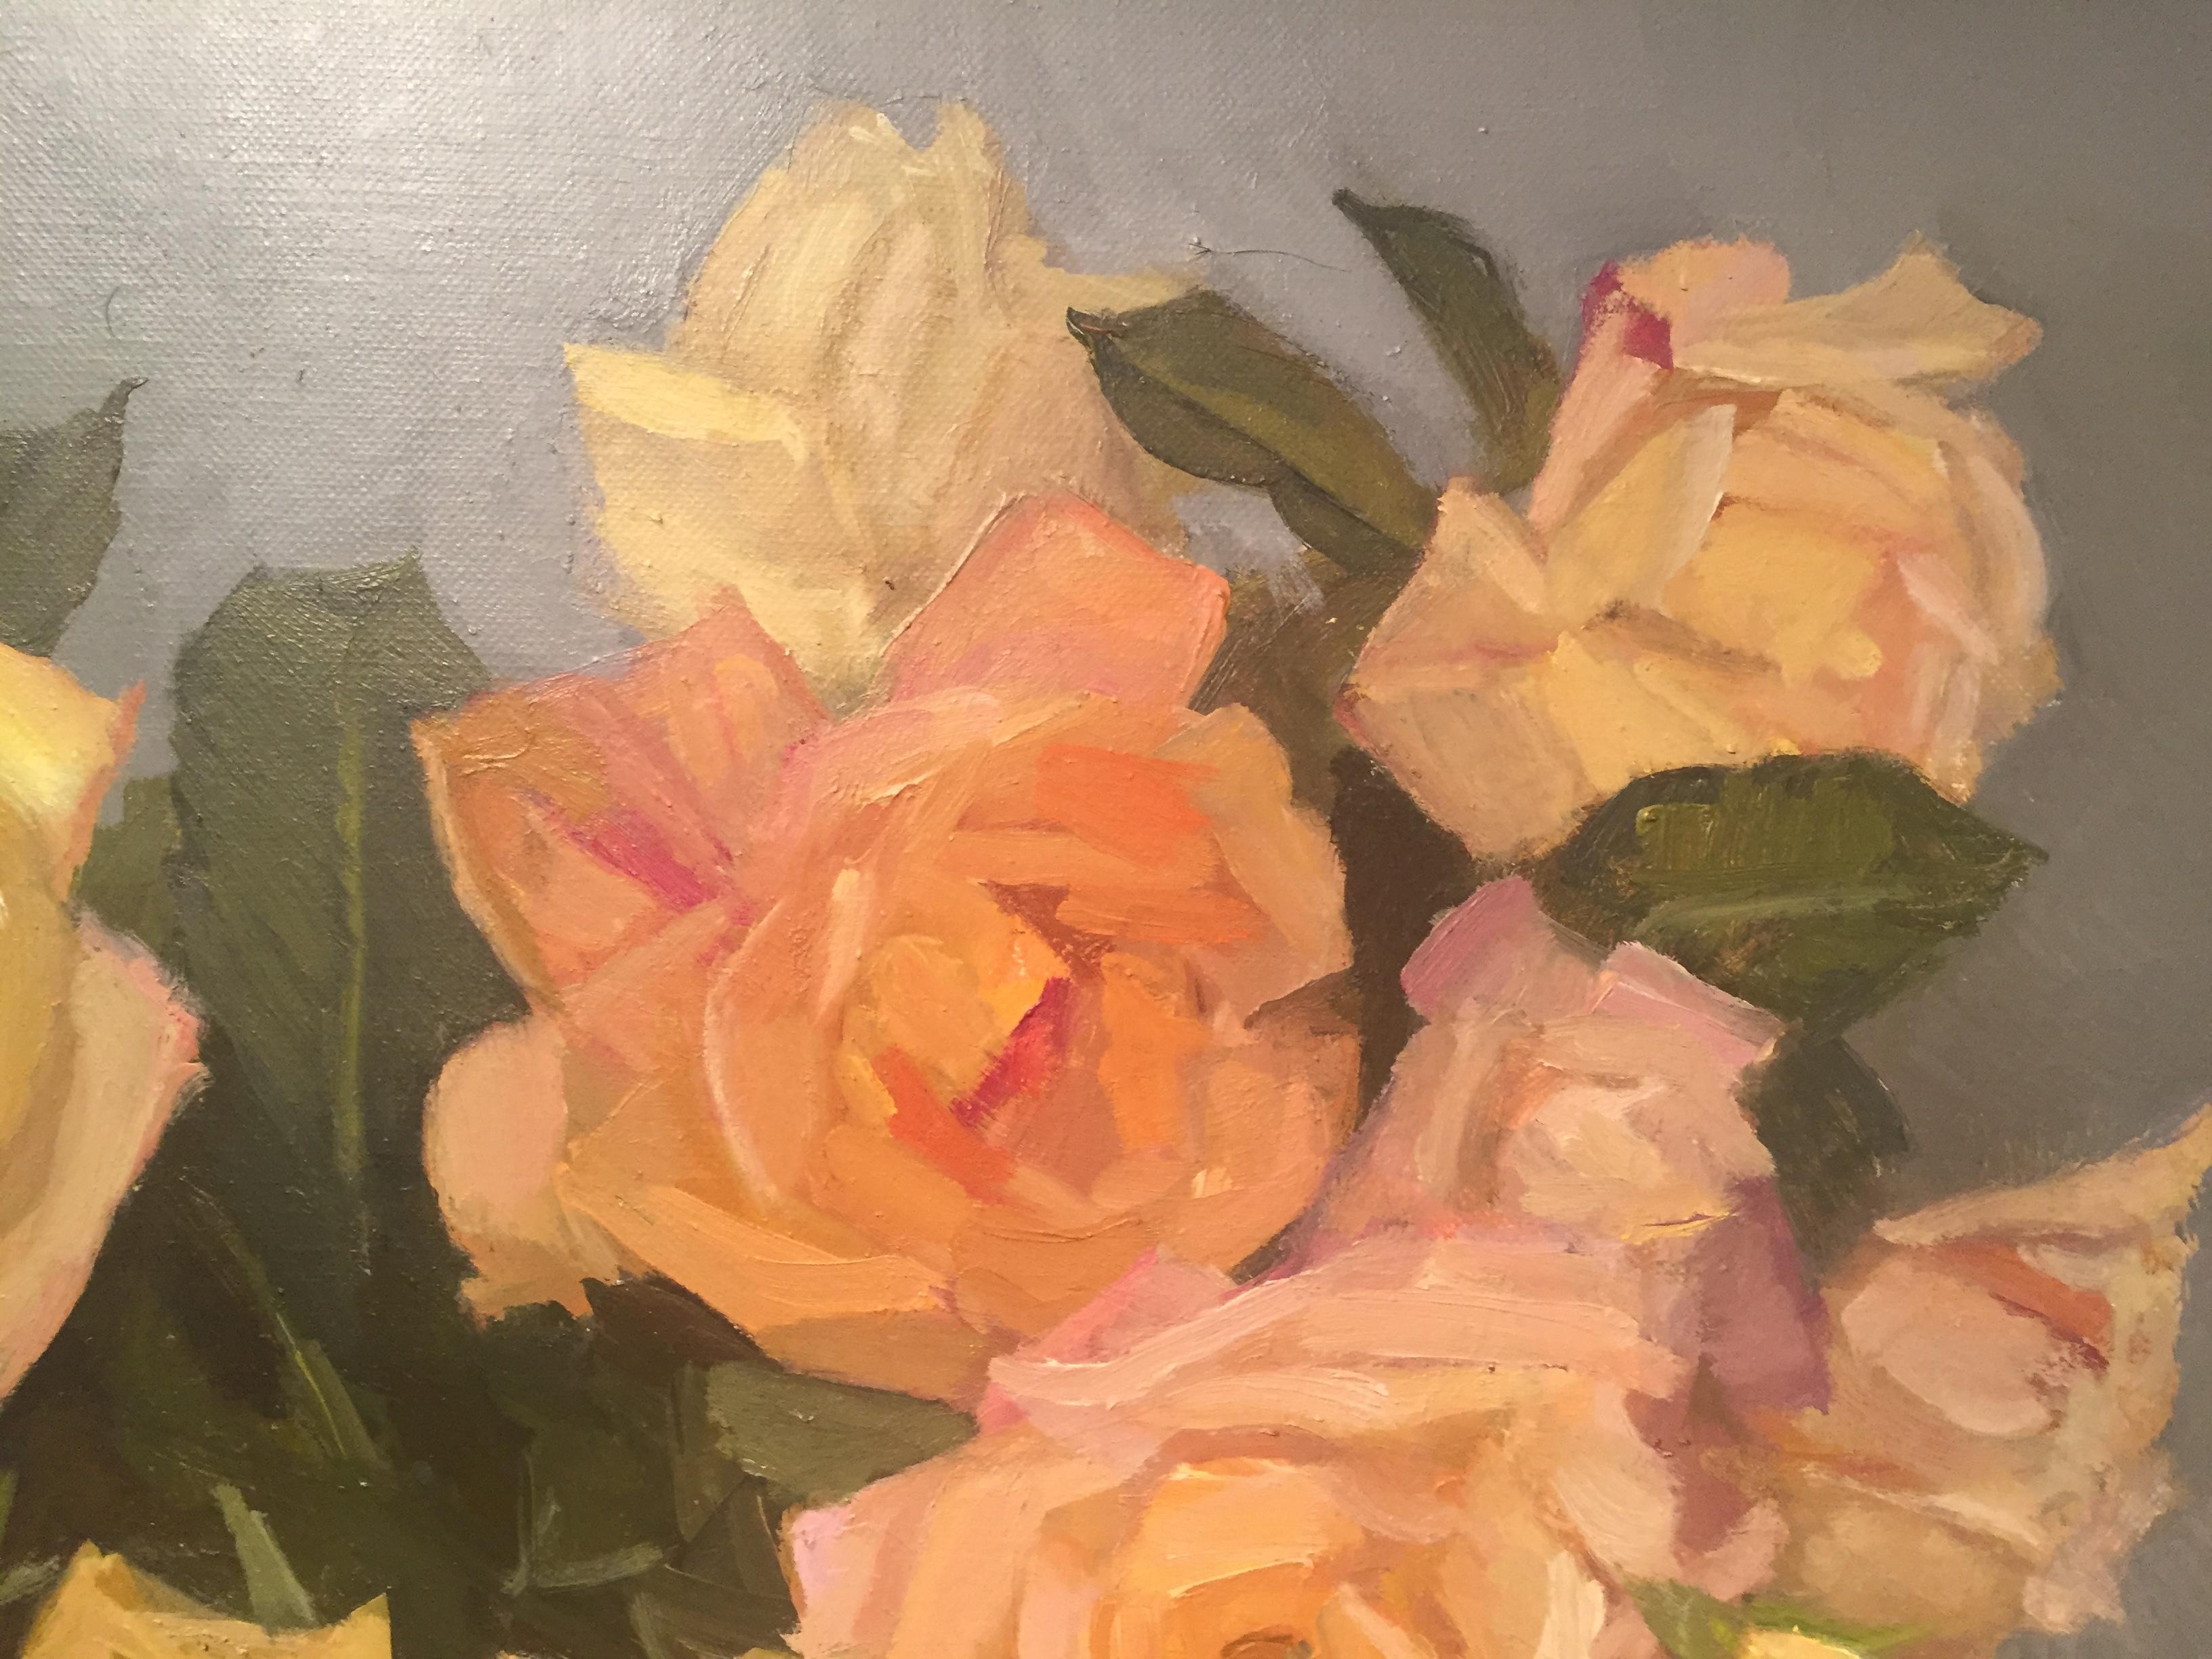 An oil painting of a wild arrangement of orange roses, flooding out of a small stemmed-glass vase.


Maryann Lucas lives and works in Sag Harbor. She is primarily self-taught but has also received instruction and support from wonderful and generous